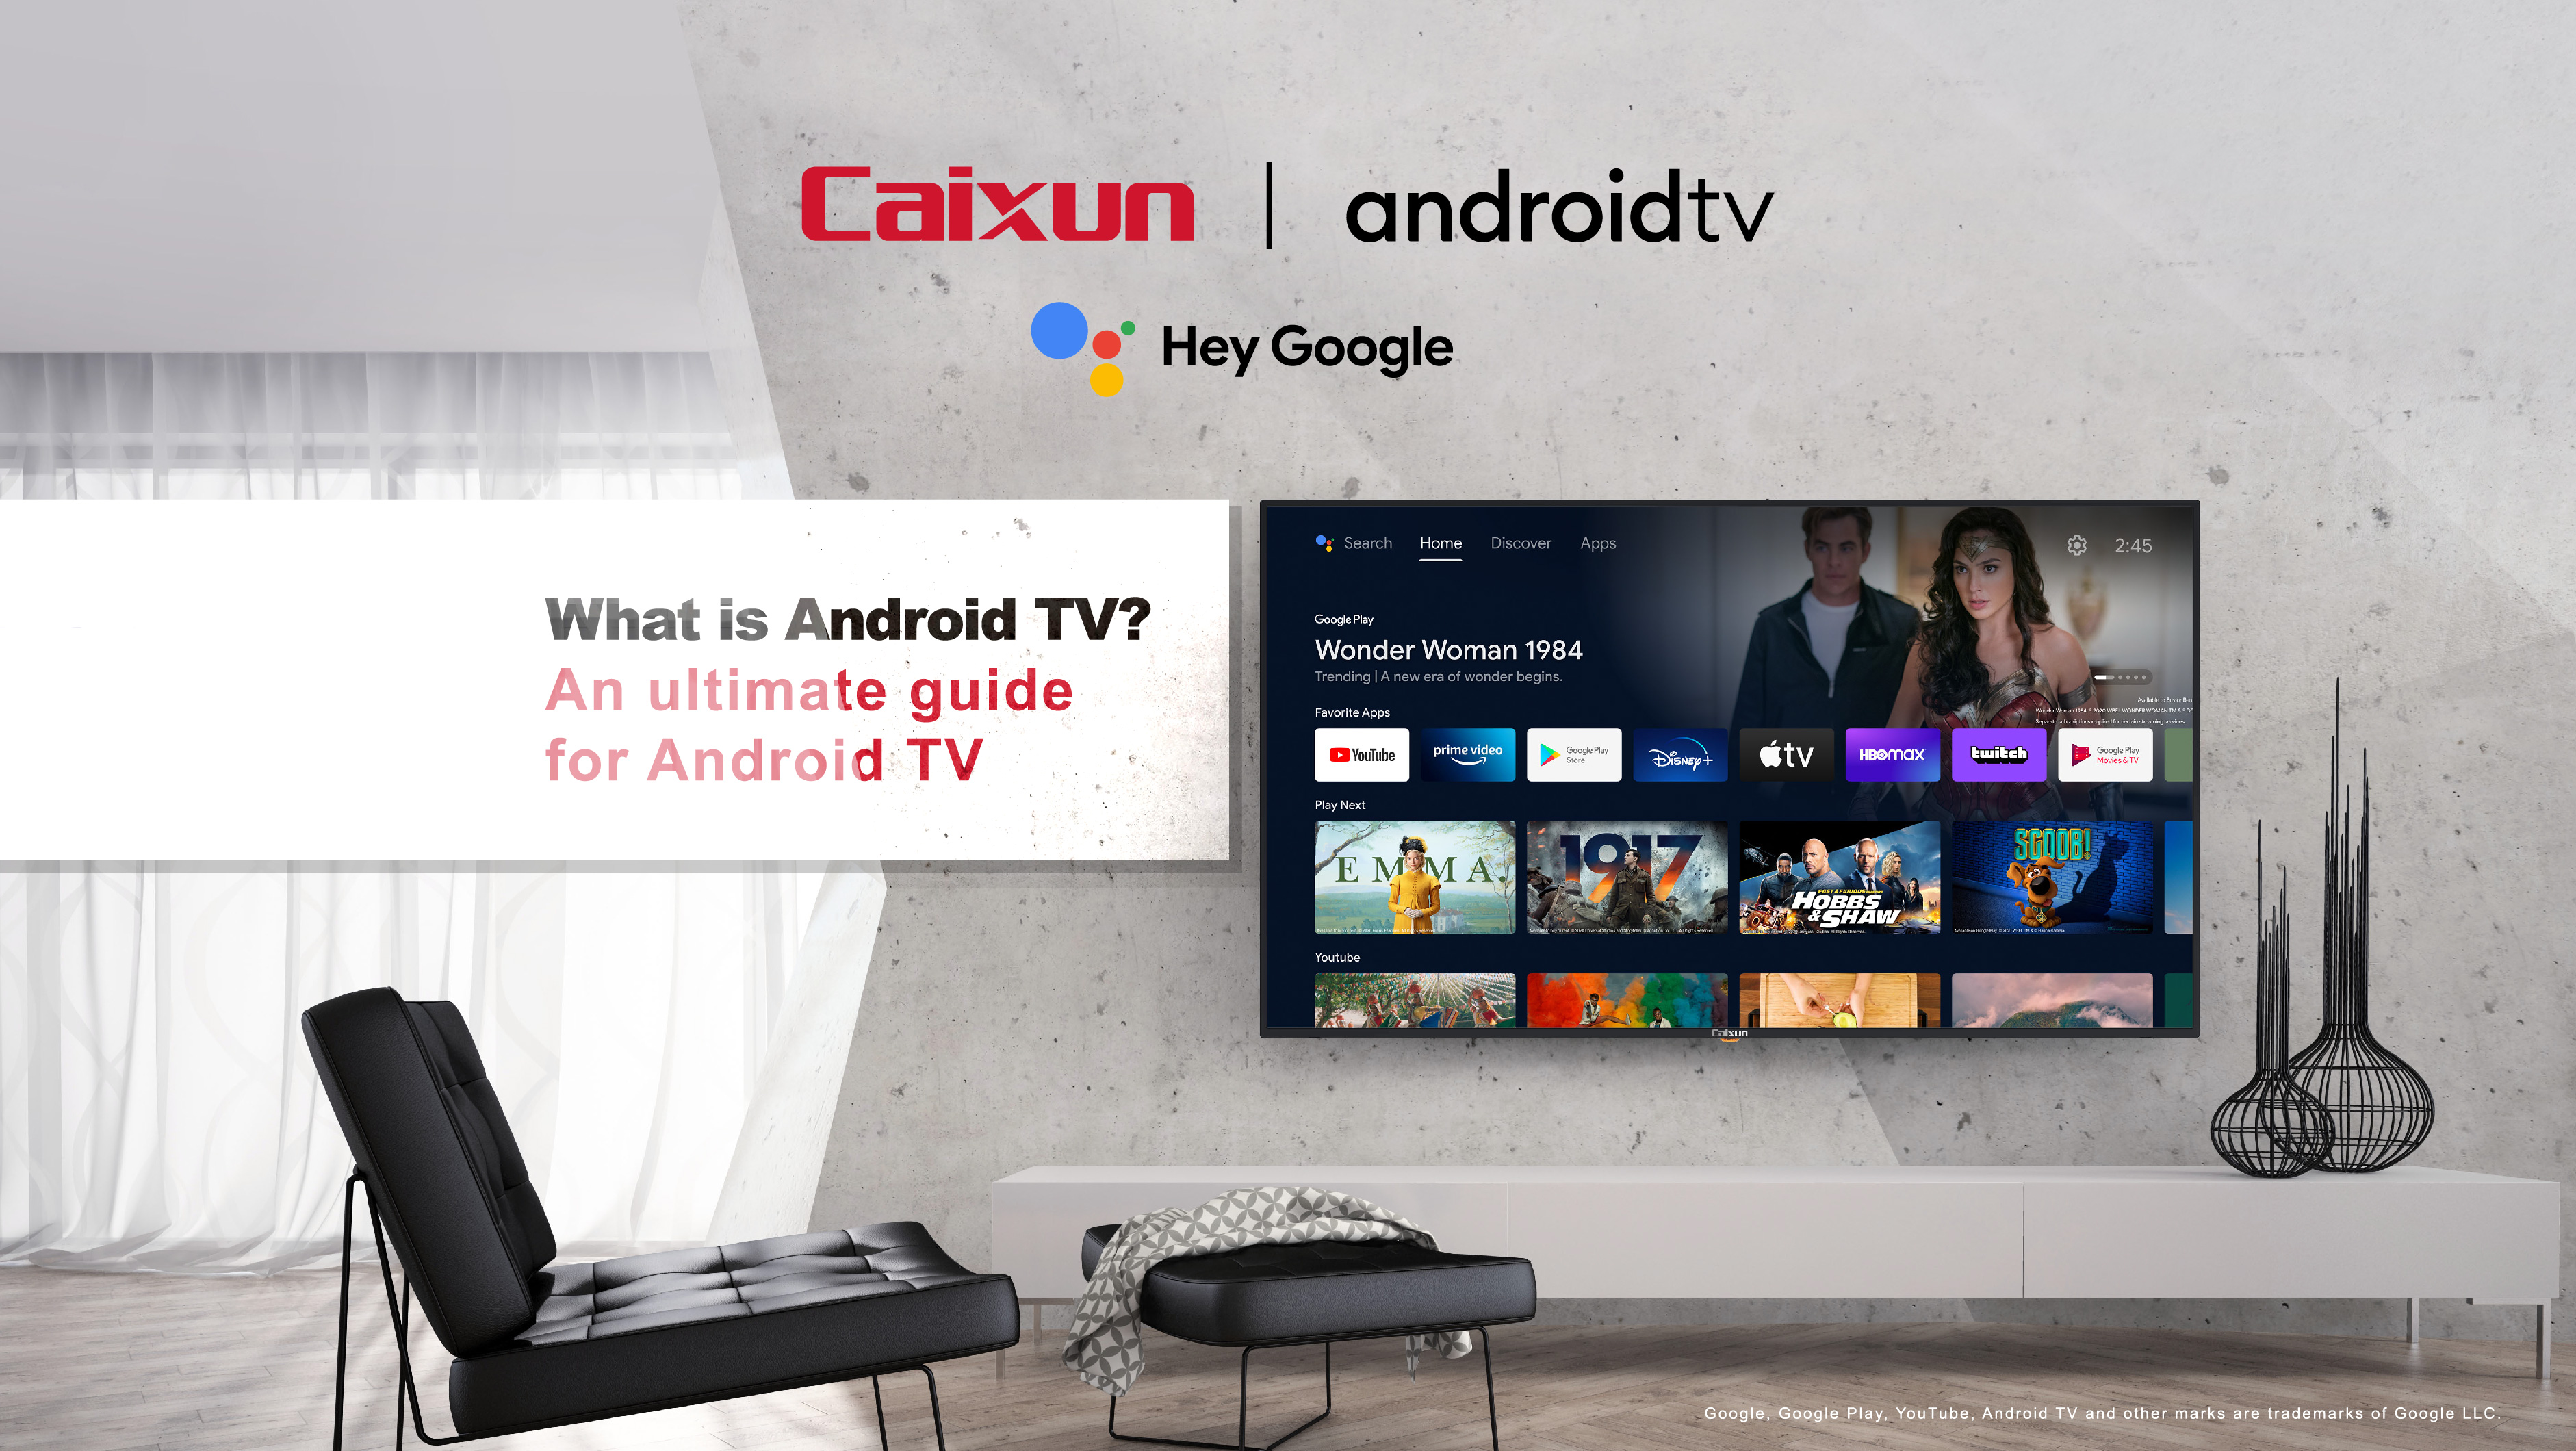 What is Android TV? An ultimate guide for Android TV: Features, Tips, Differences from other Smart TVs